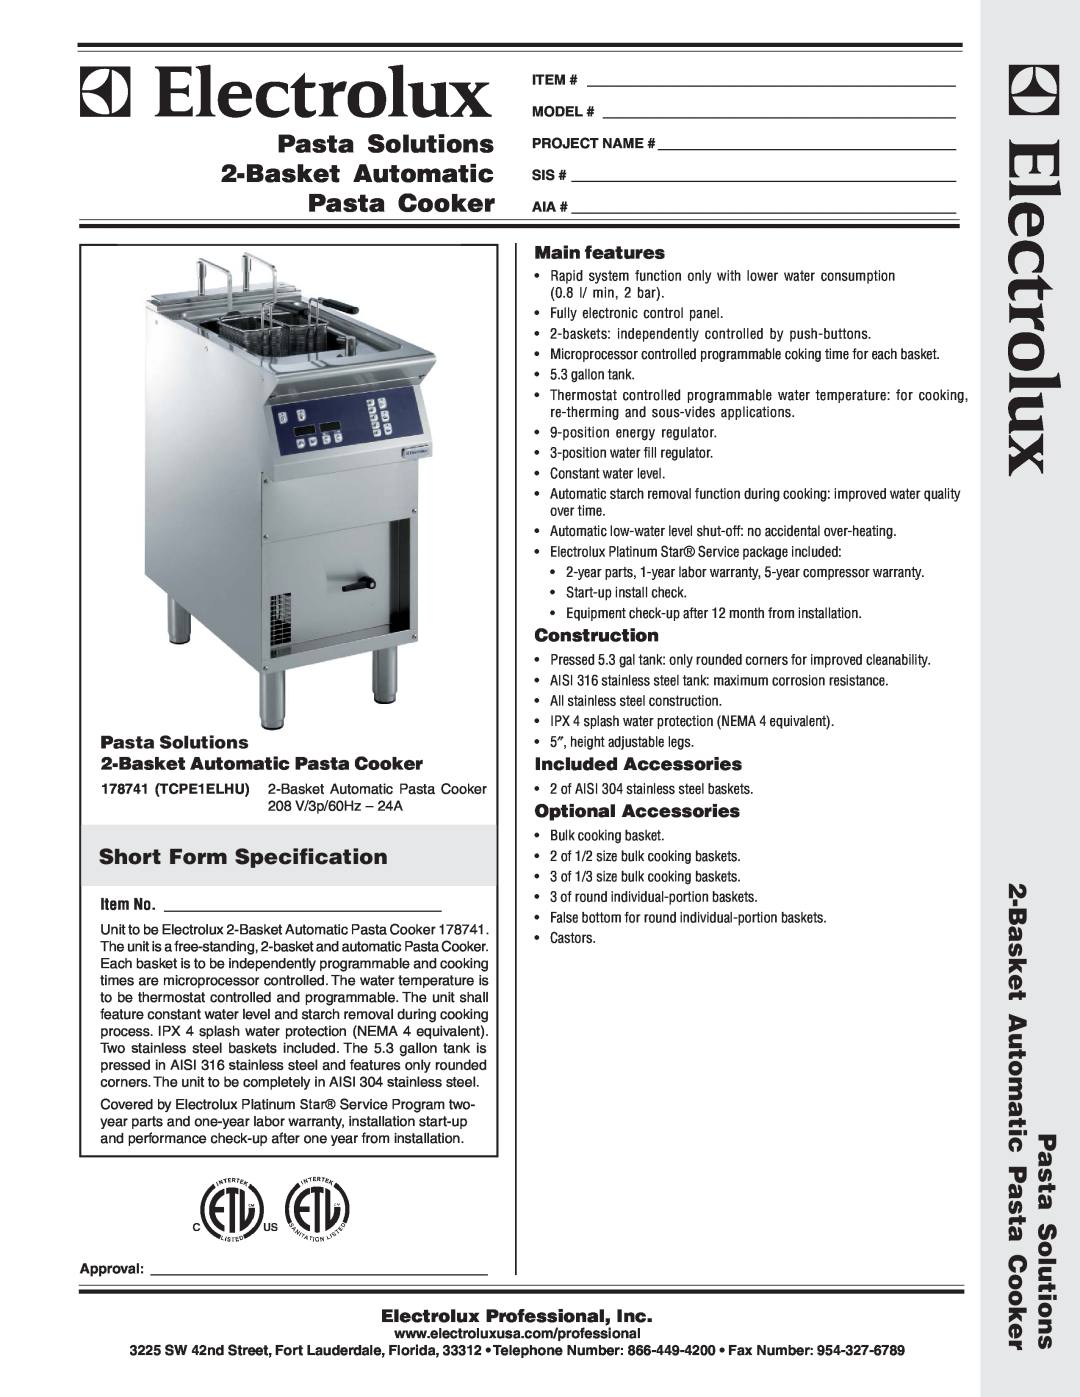 Electrolux 178741 warranty Short Form Specification, Main features, Construction, Pasta Solutions, Included Accessories 